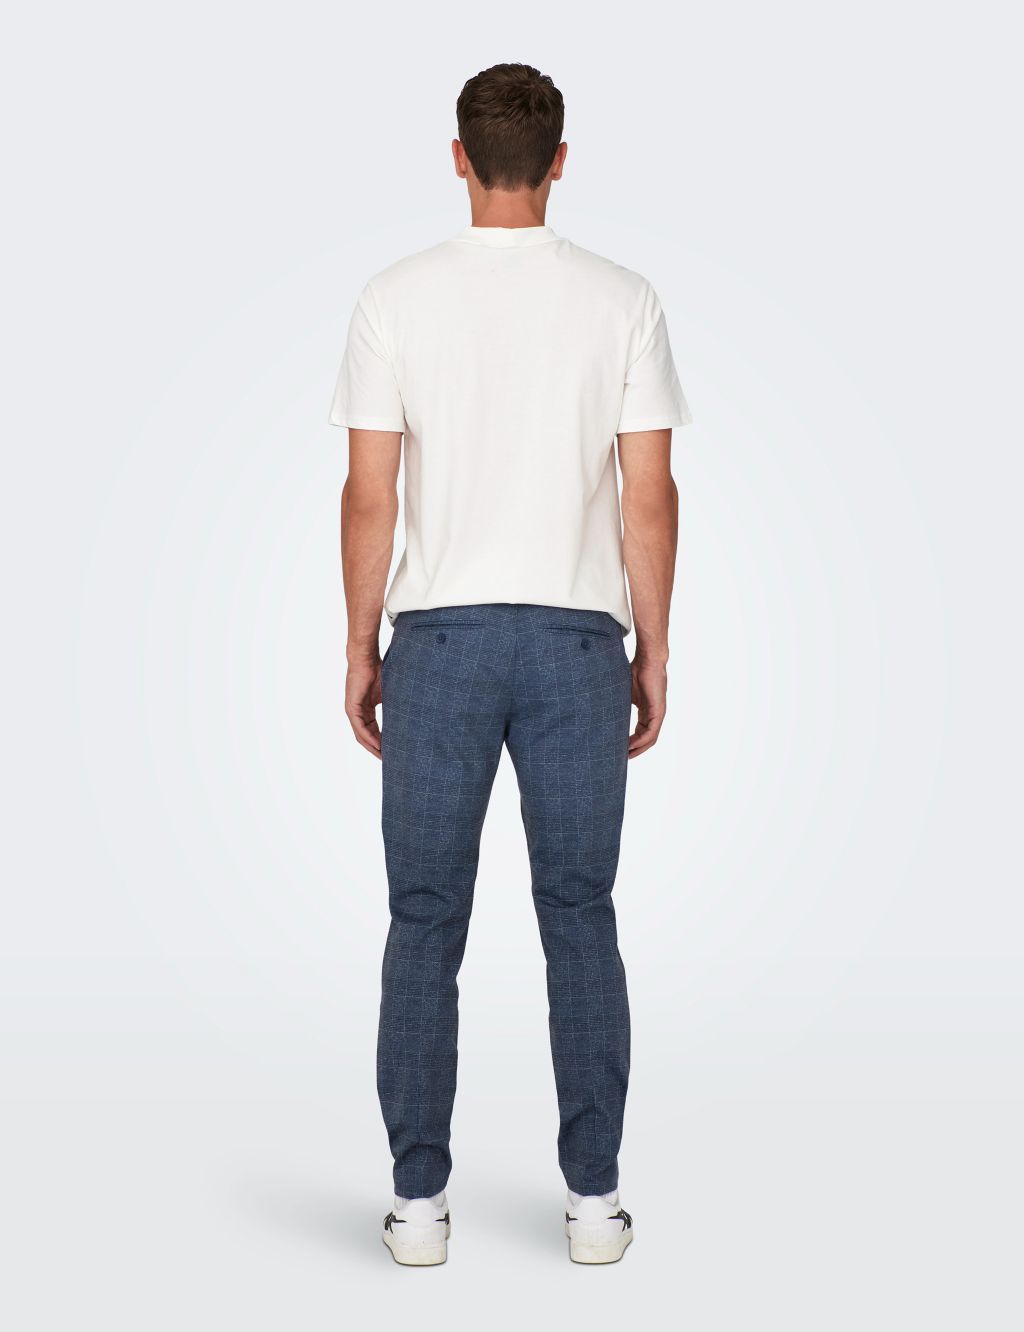 Tapered Fit Checked Trousers image 4